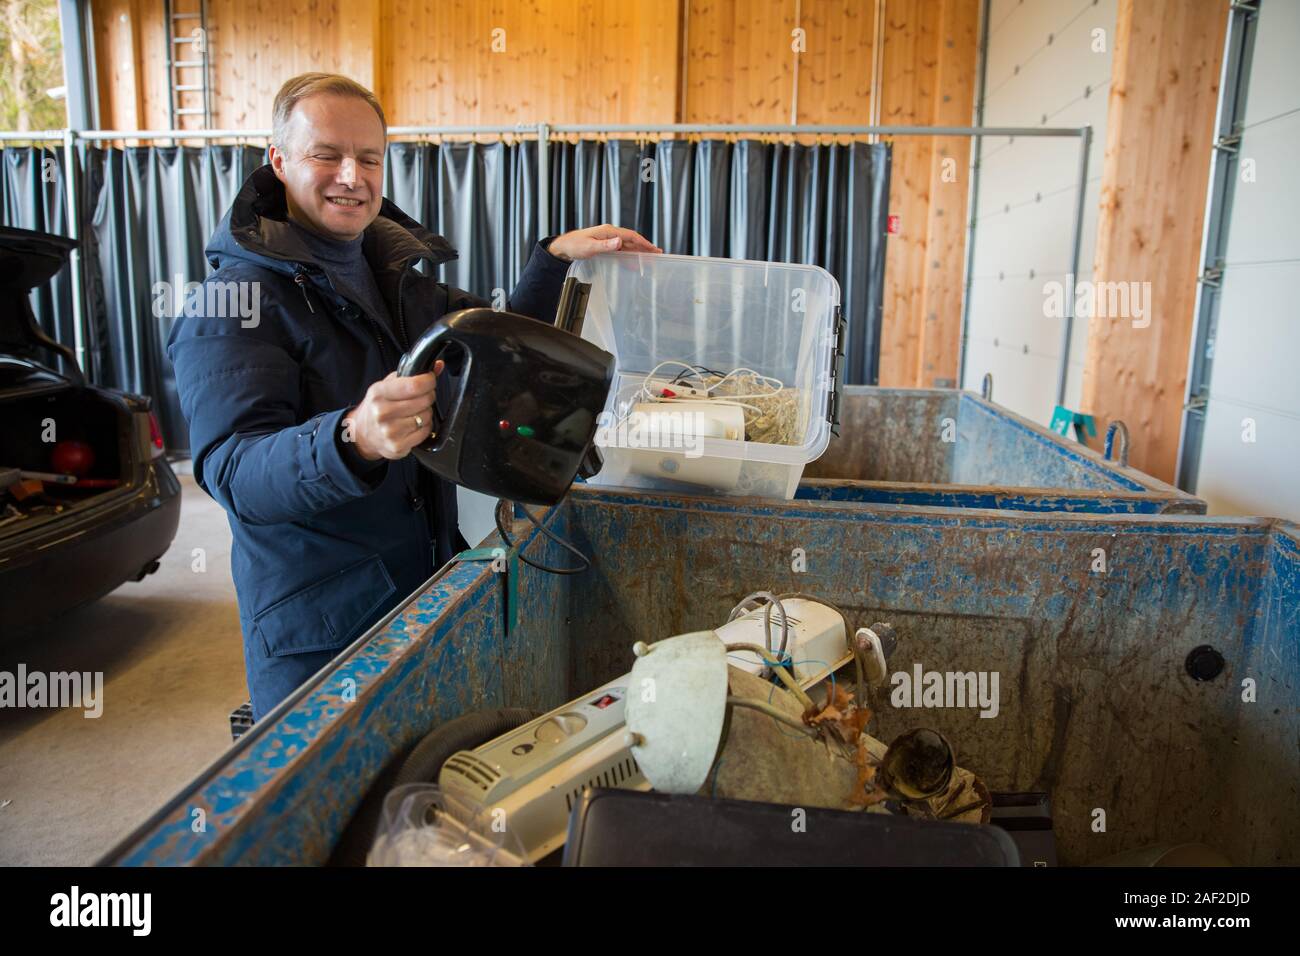 A man putting old appliances into dumpster in sorting centre for safe disposal and recycling Stock Photo